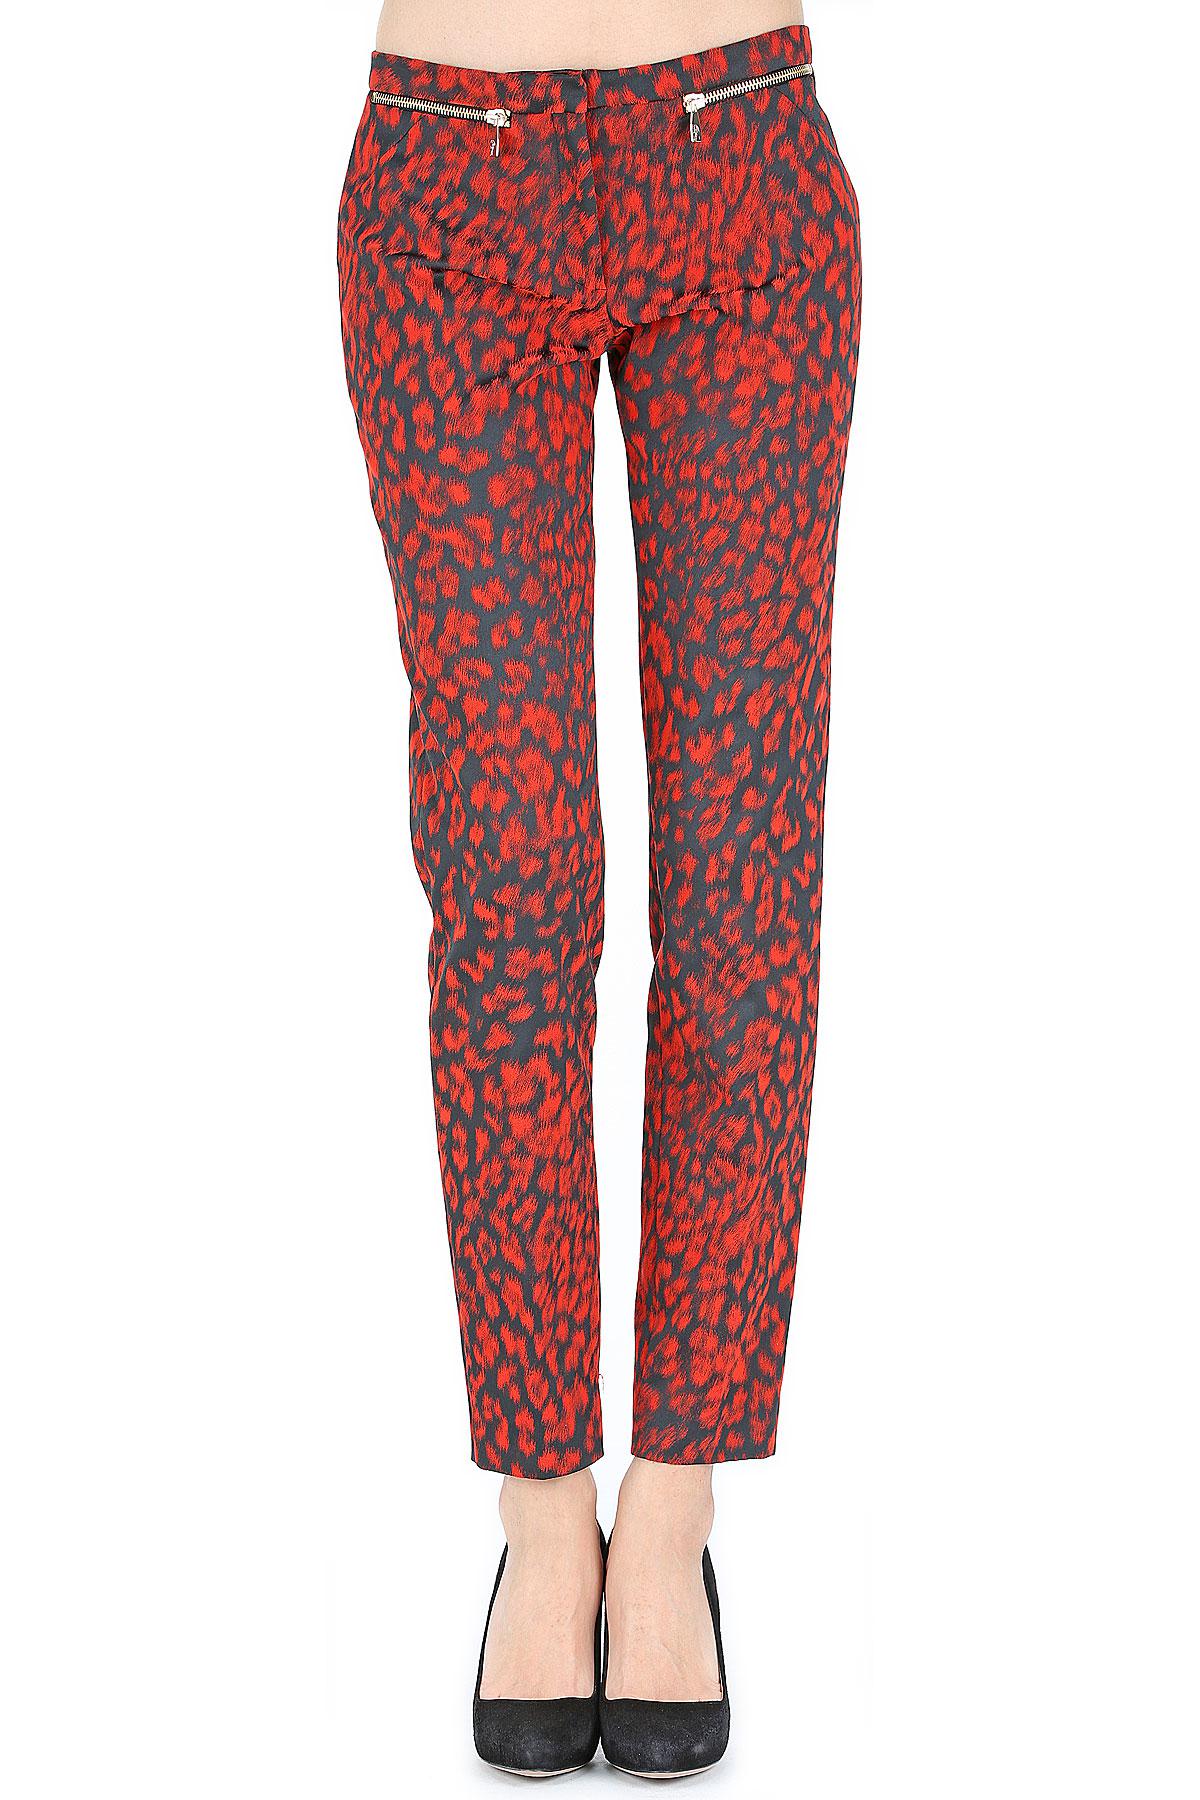 Lyst - Versace Pants For Women On Sale in Red